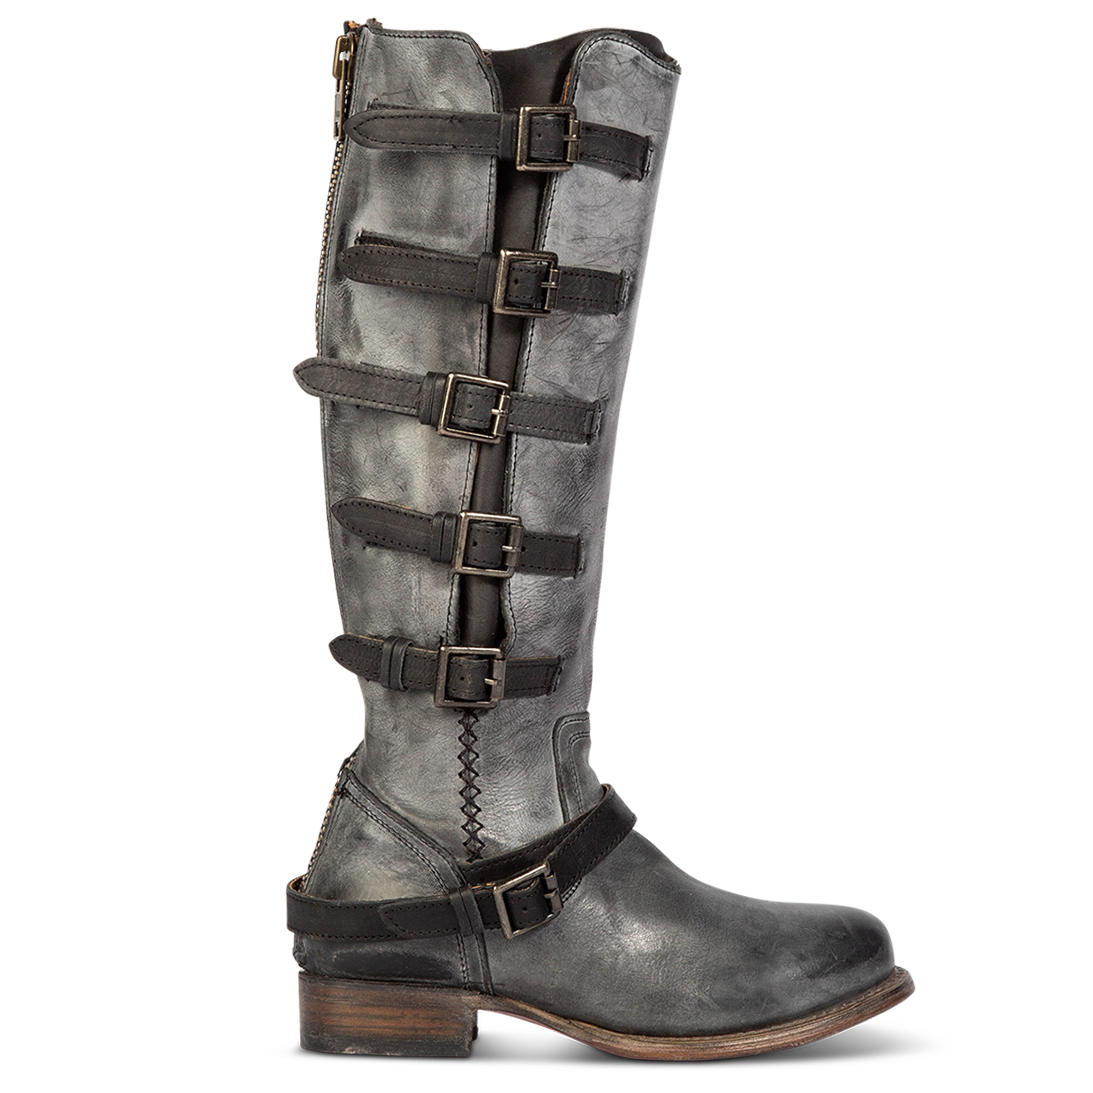 FREEBIRD women's Remy black leather boot with tall shaft and accent buckles